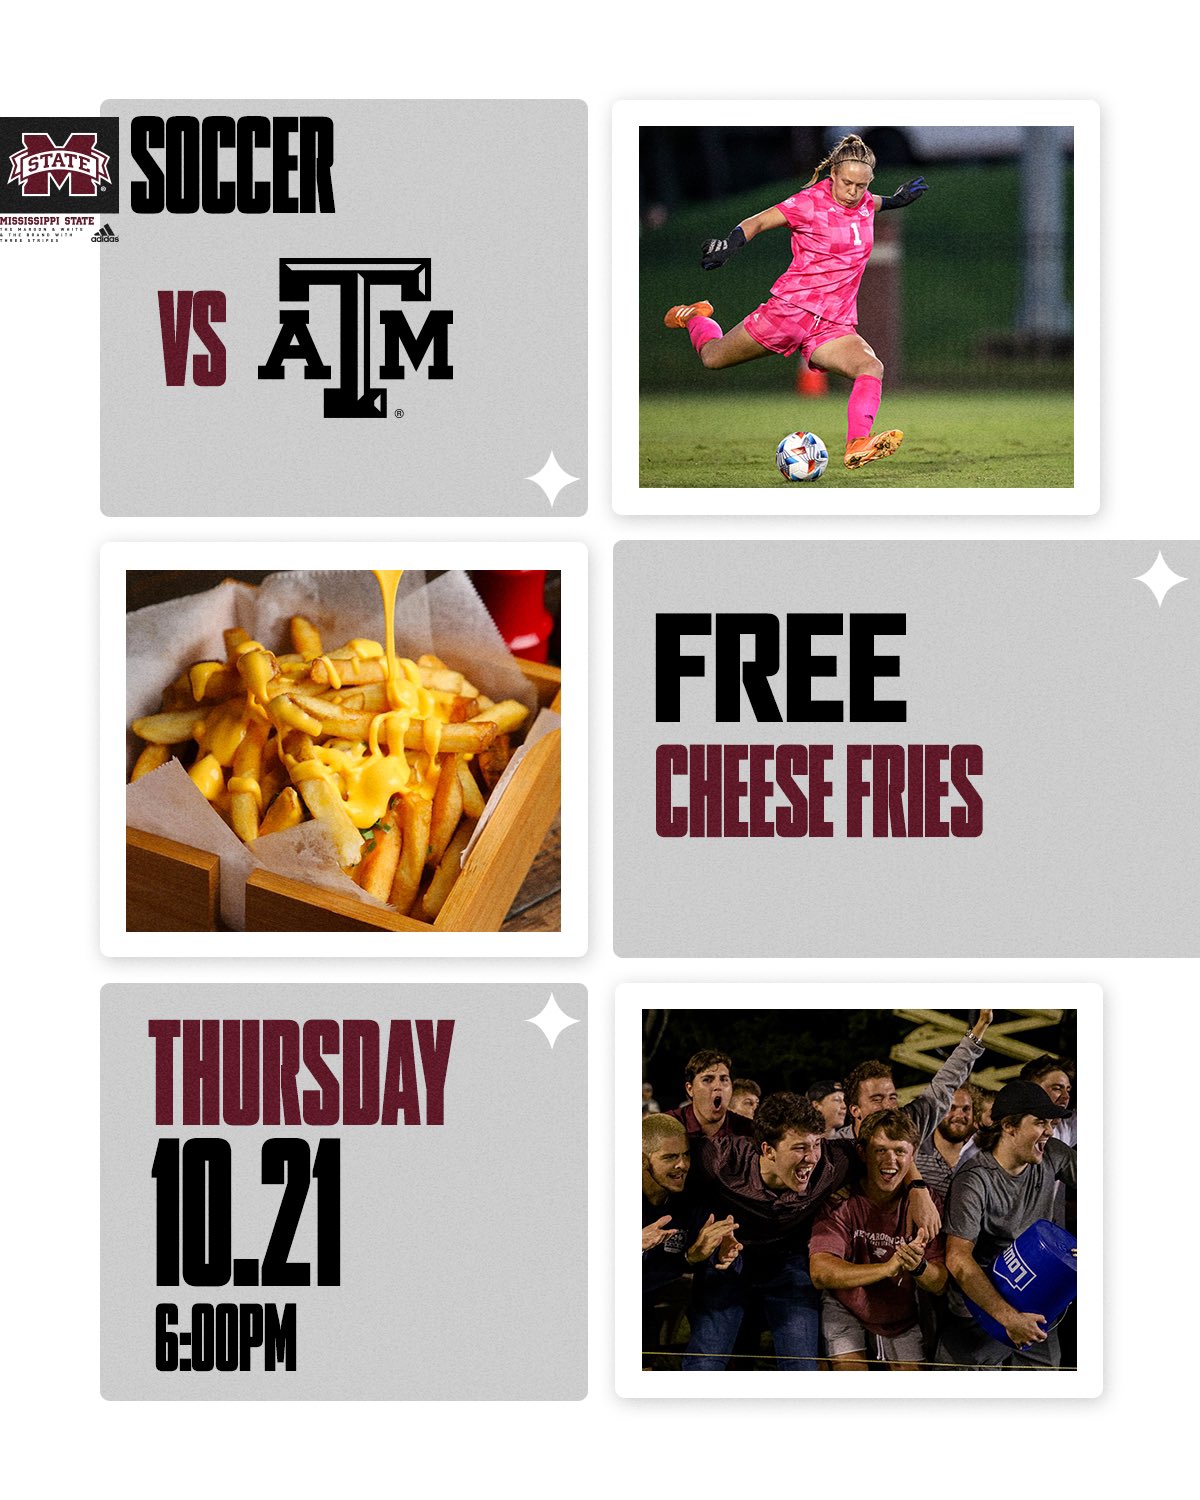 Graphic promoting a cheese fries giveaway at MSU Soccer's Oct. 21 match versus Texas A&M